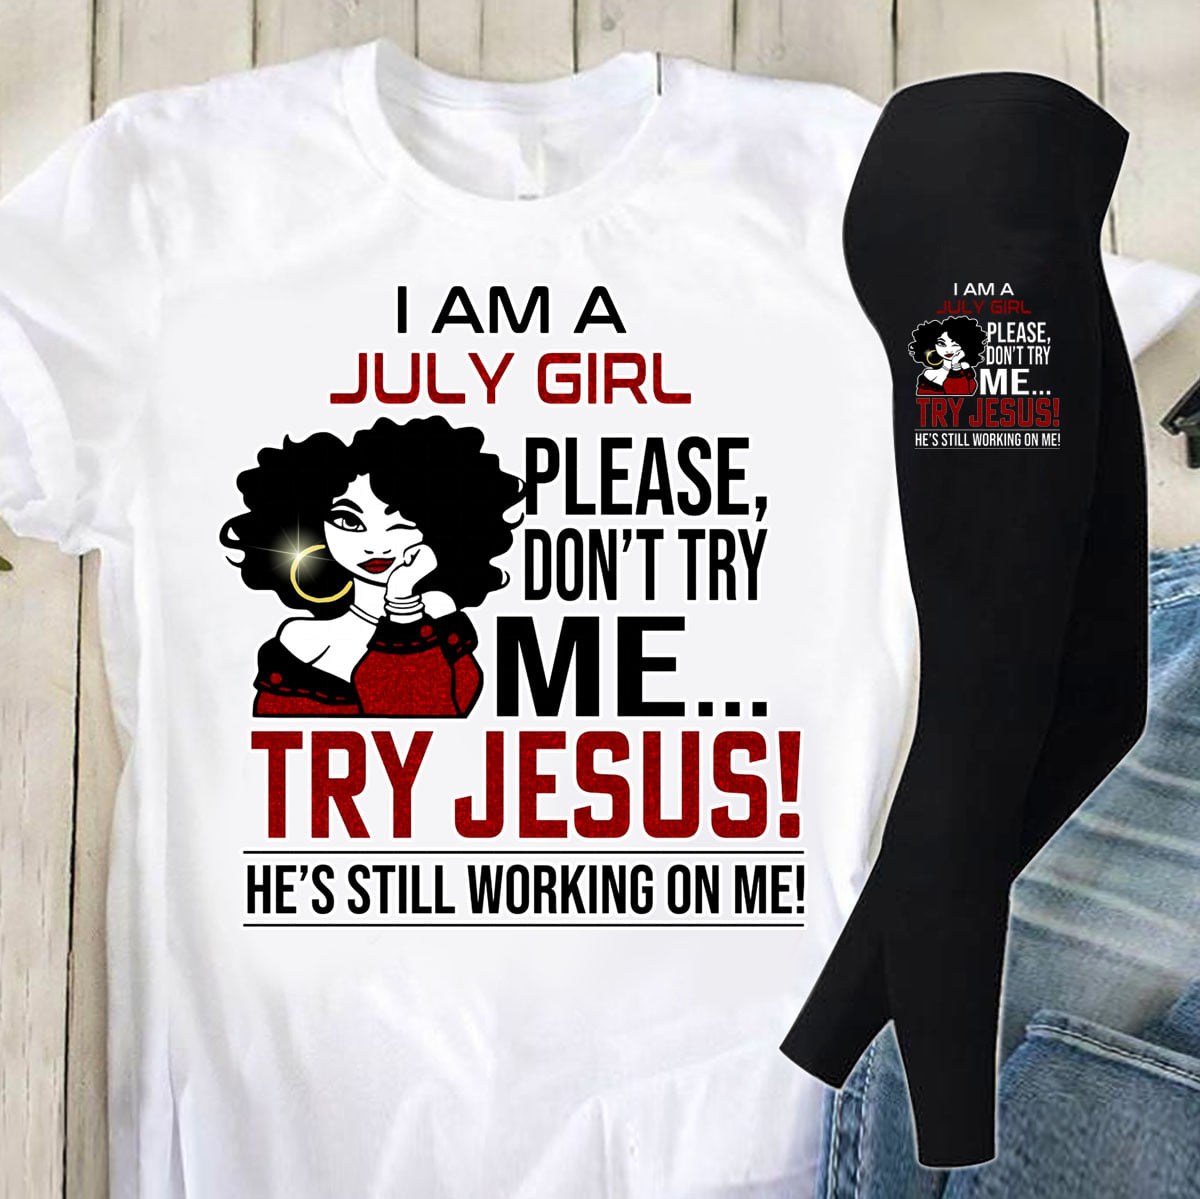 I am a July girl please, don't try me try Jesus he's still working on me